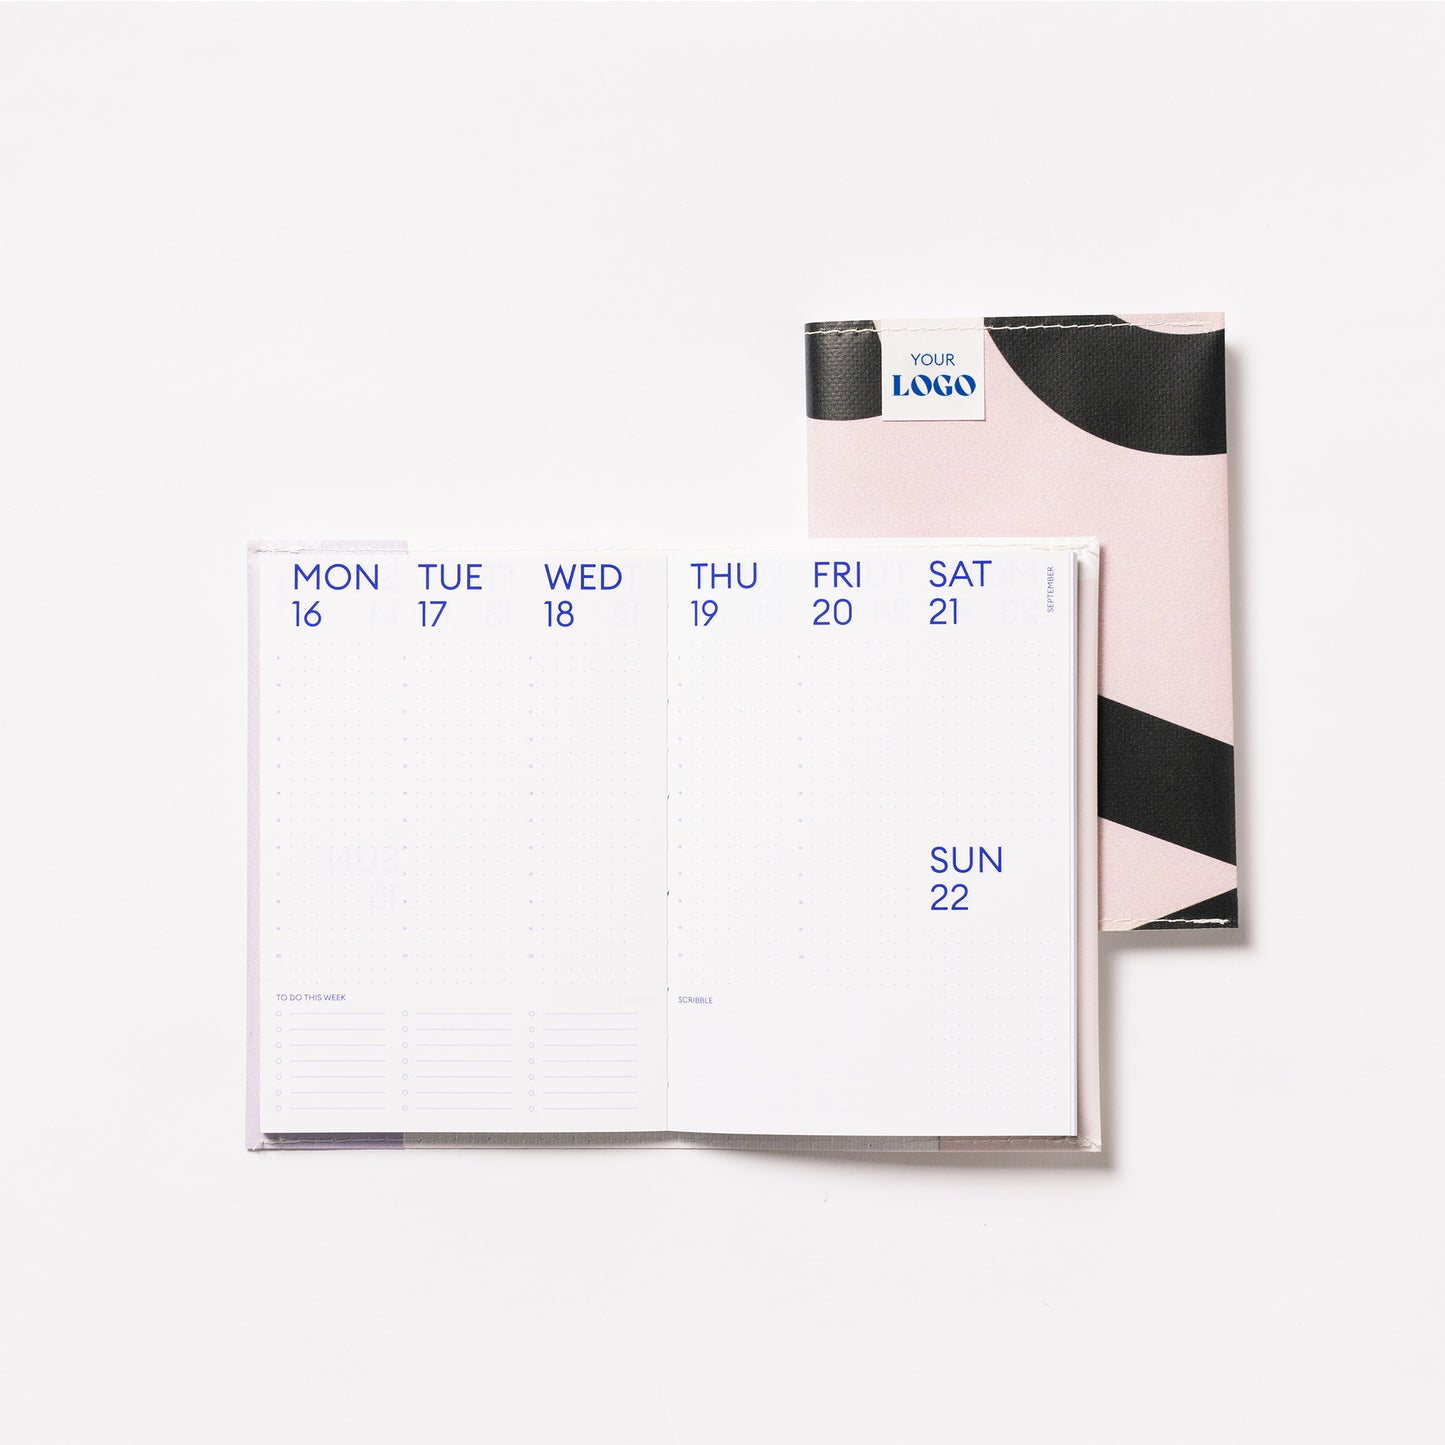 This agenda is the perfect assistant for all your daily adventures.